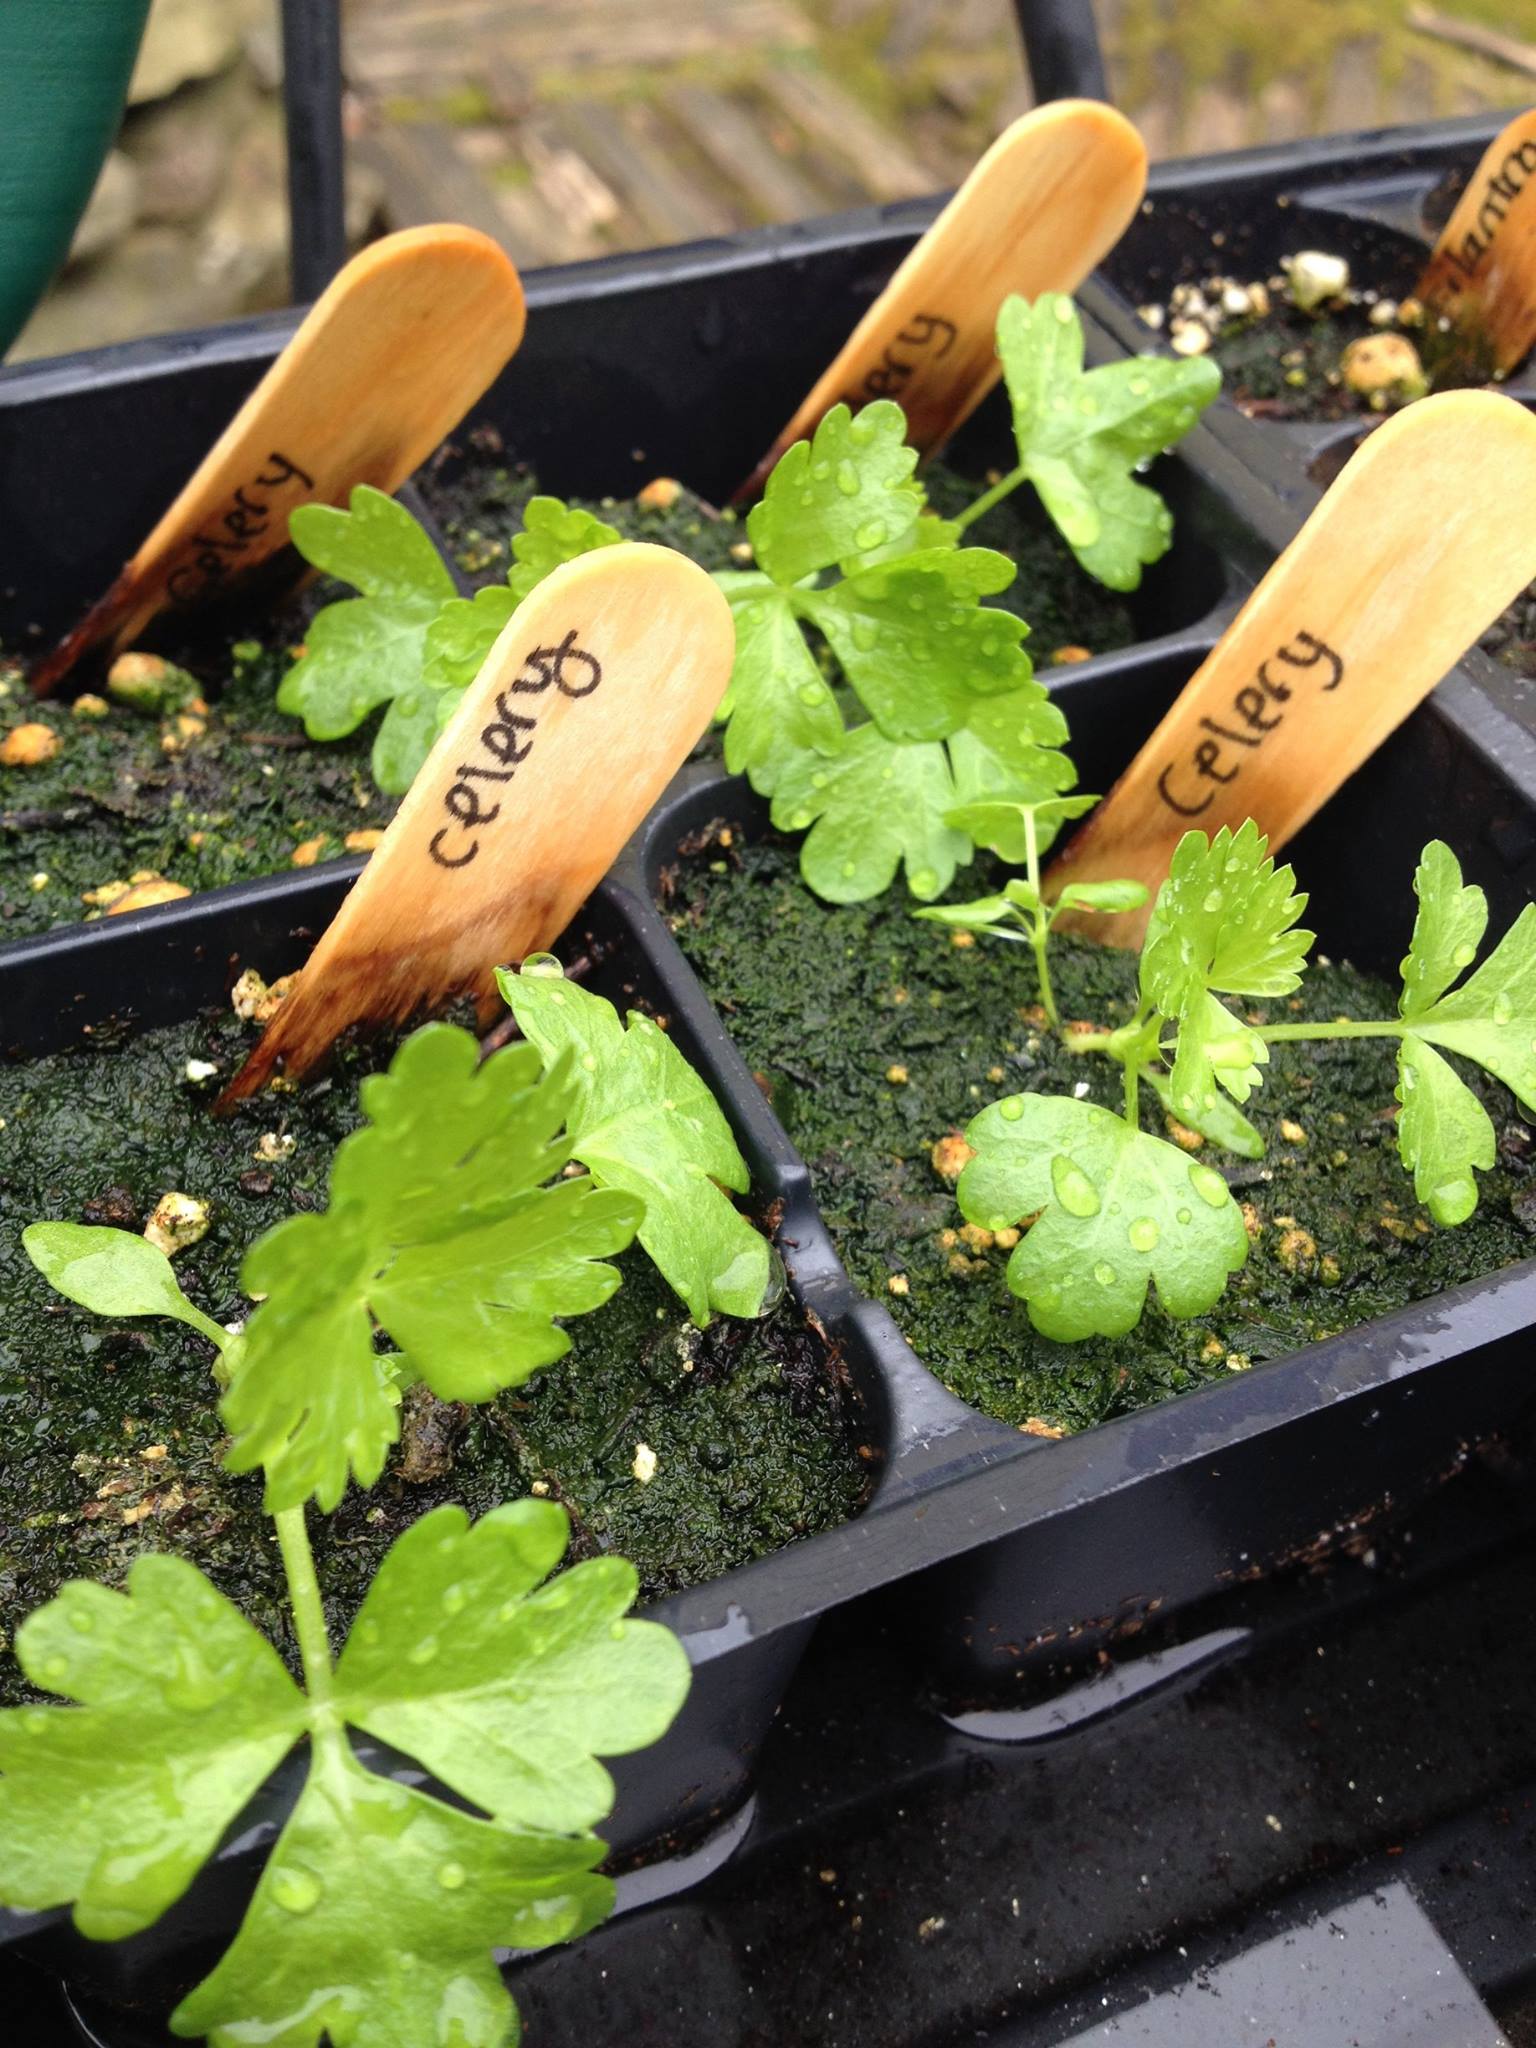 Celery in small pots with wooden stick labeled celery.